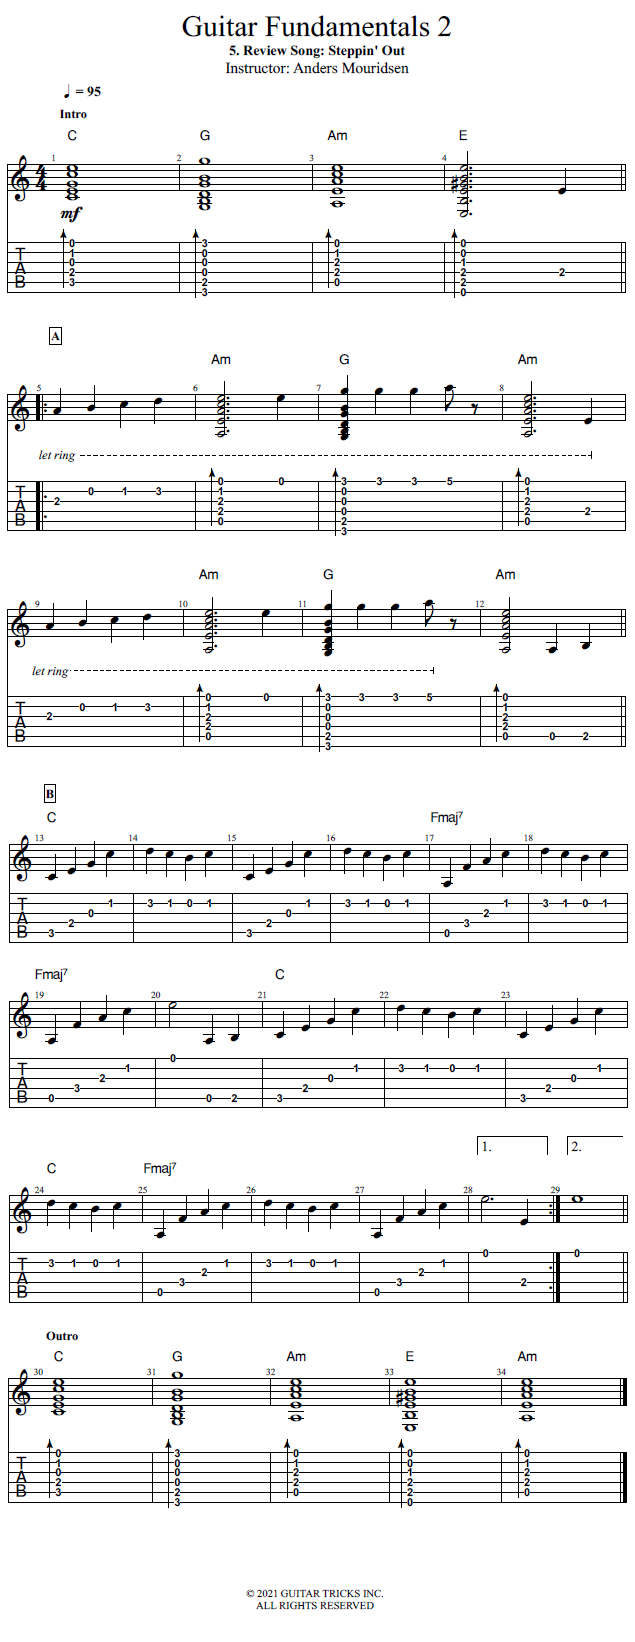 Review Song: Steppin' Out song notation